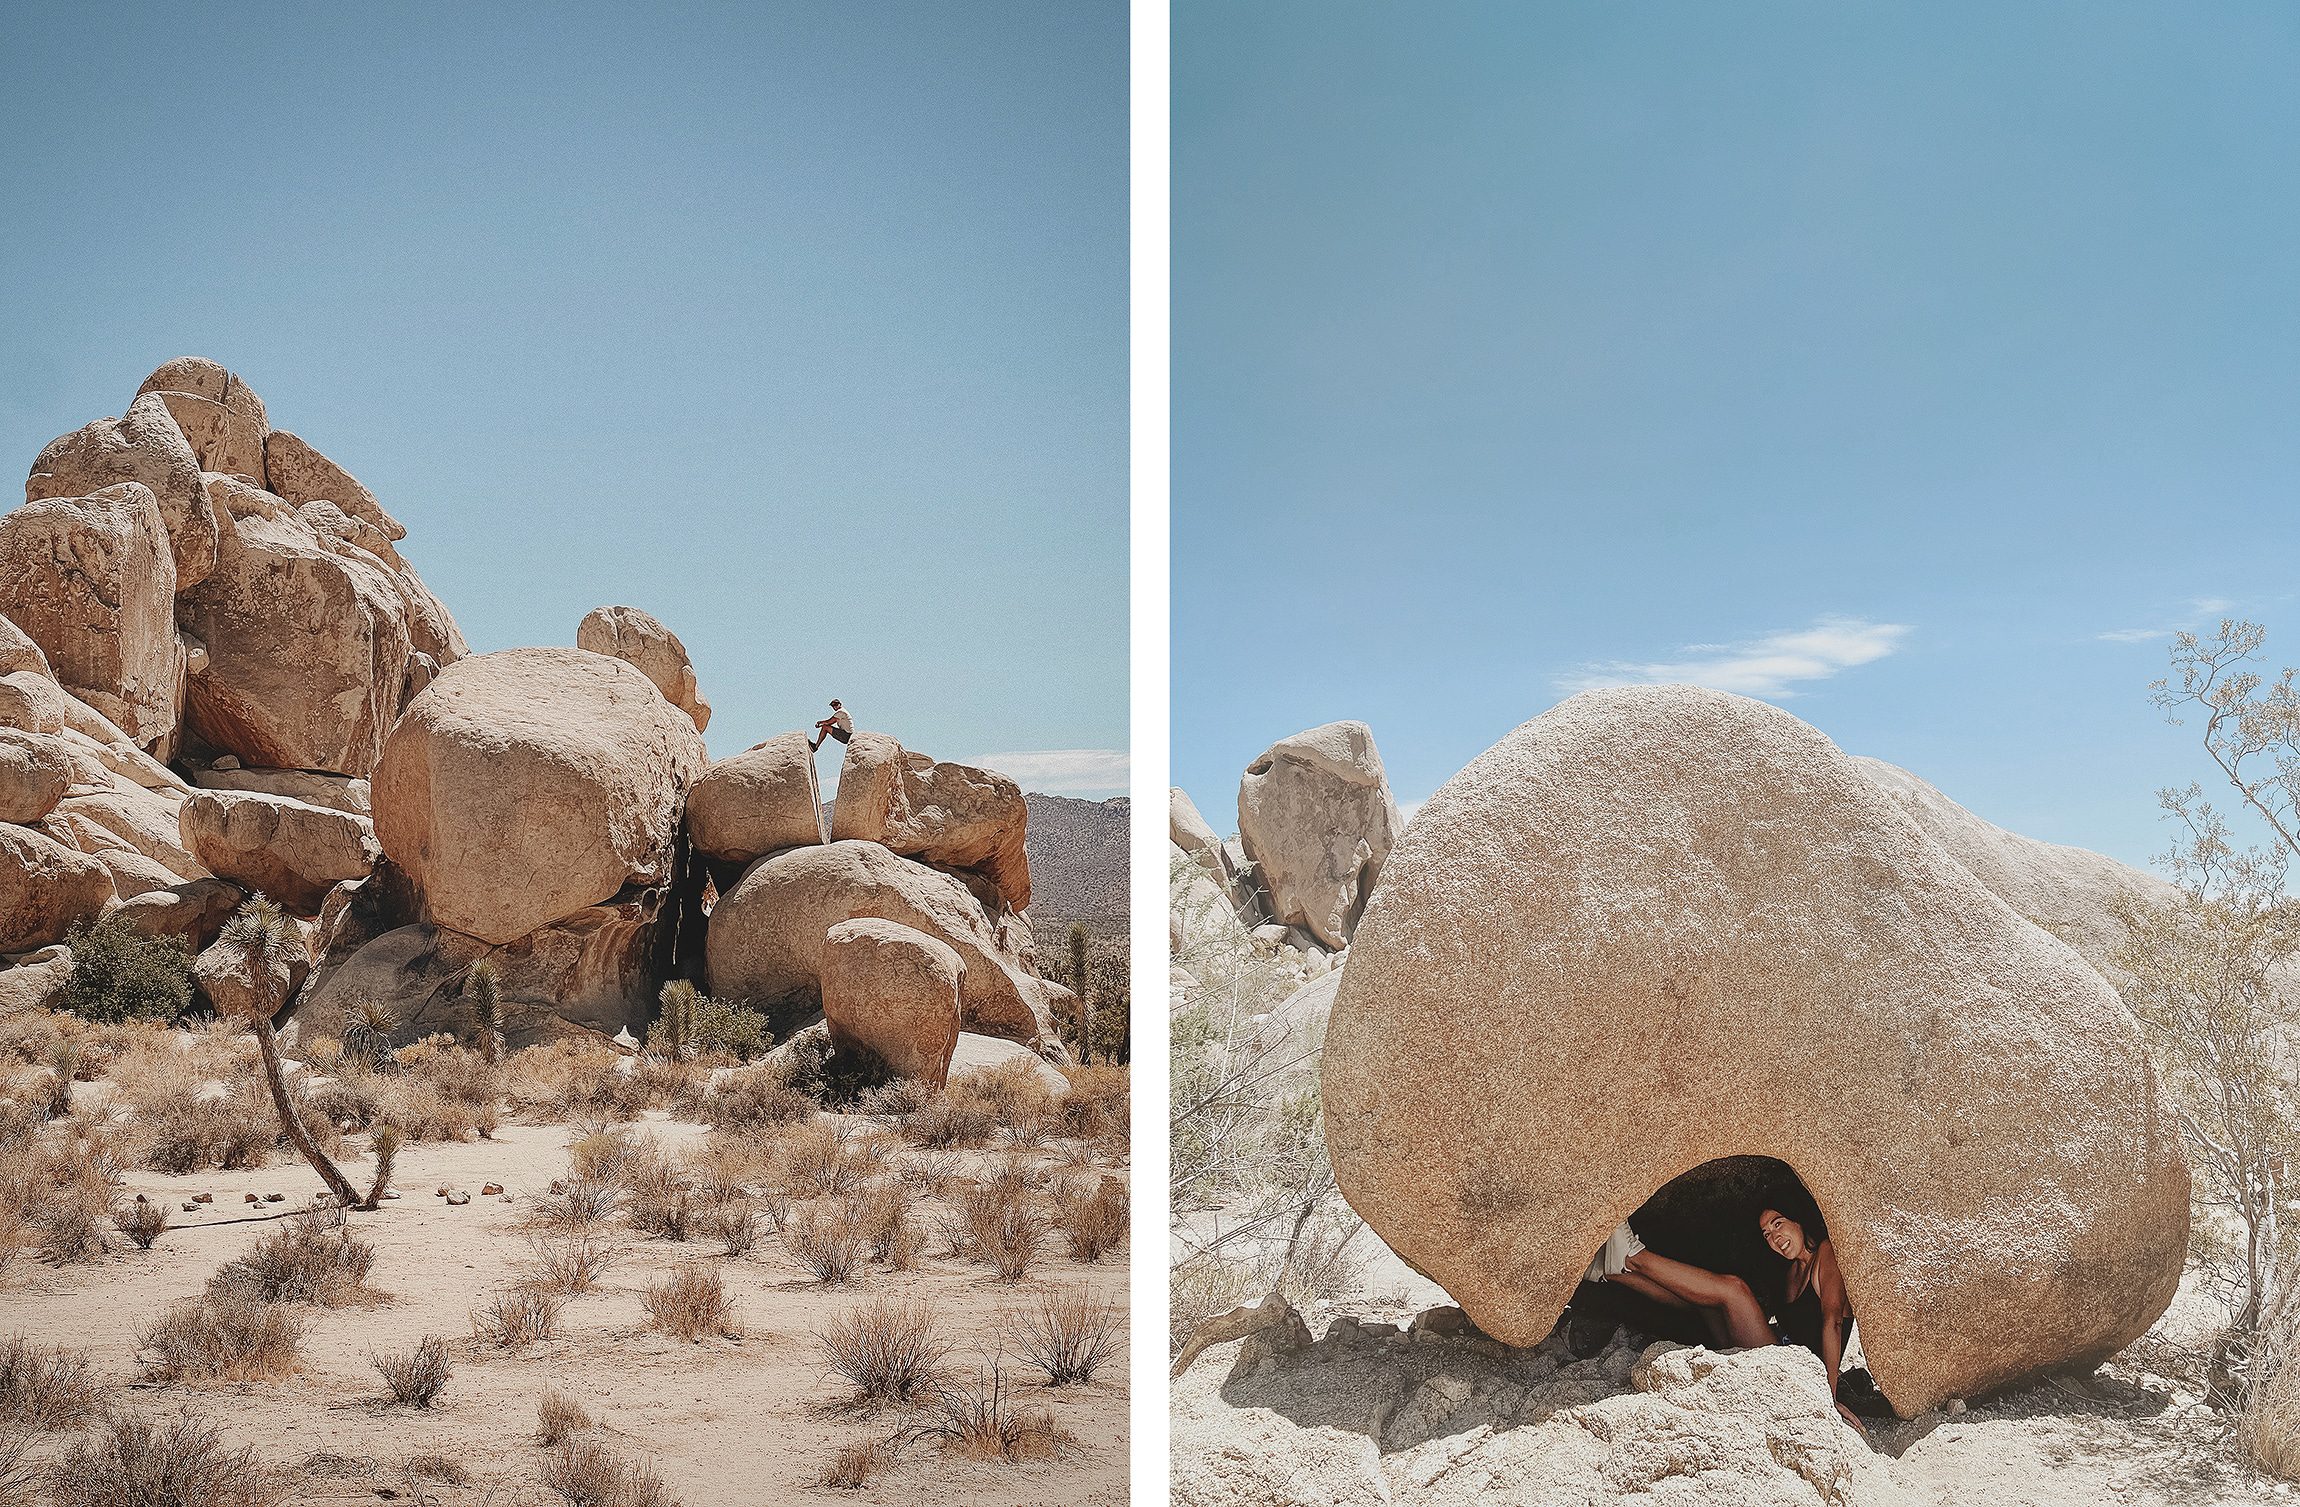 Playing in and on the boulders in Joshua Tree National Park | via Yellow Brick Home